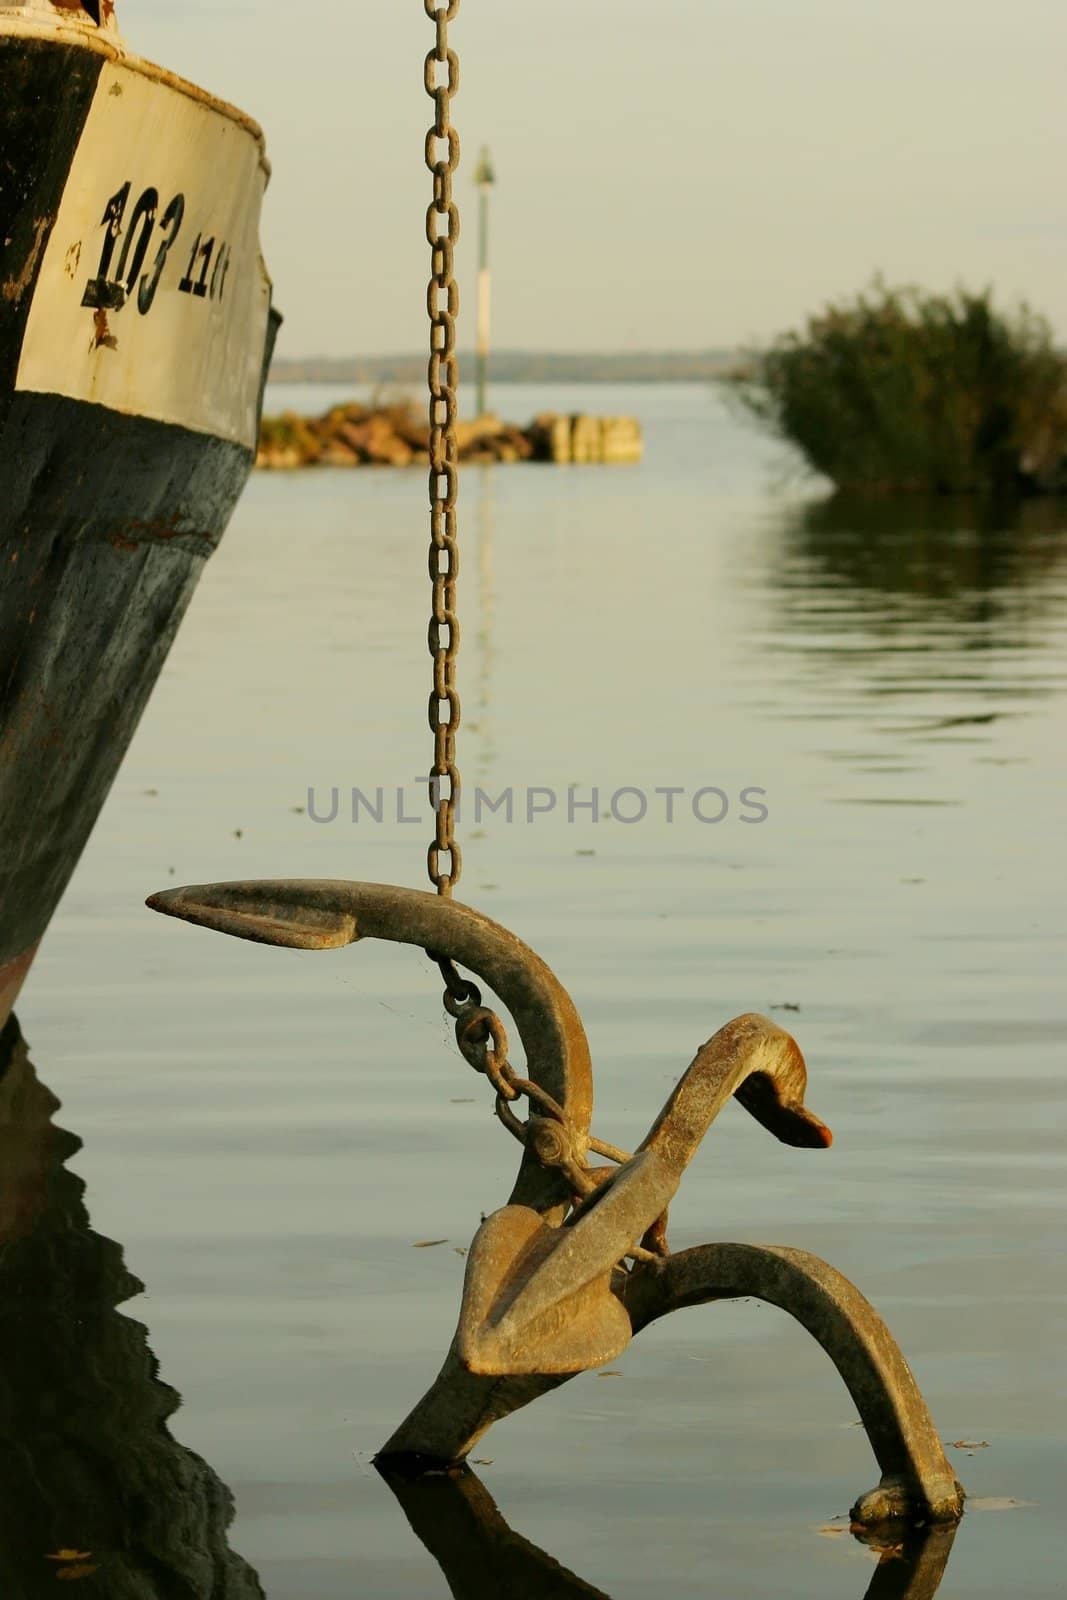 Ship and anchor by Digoarpi